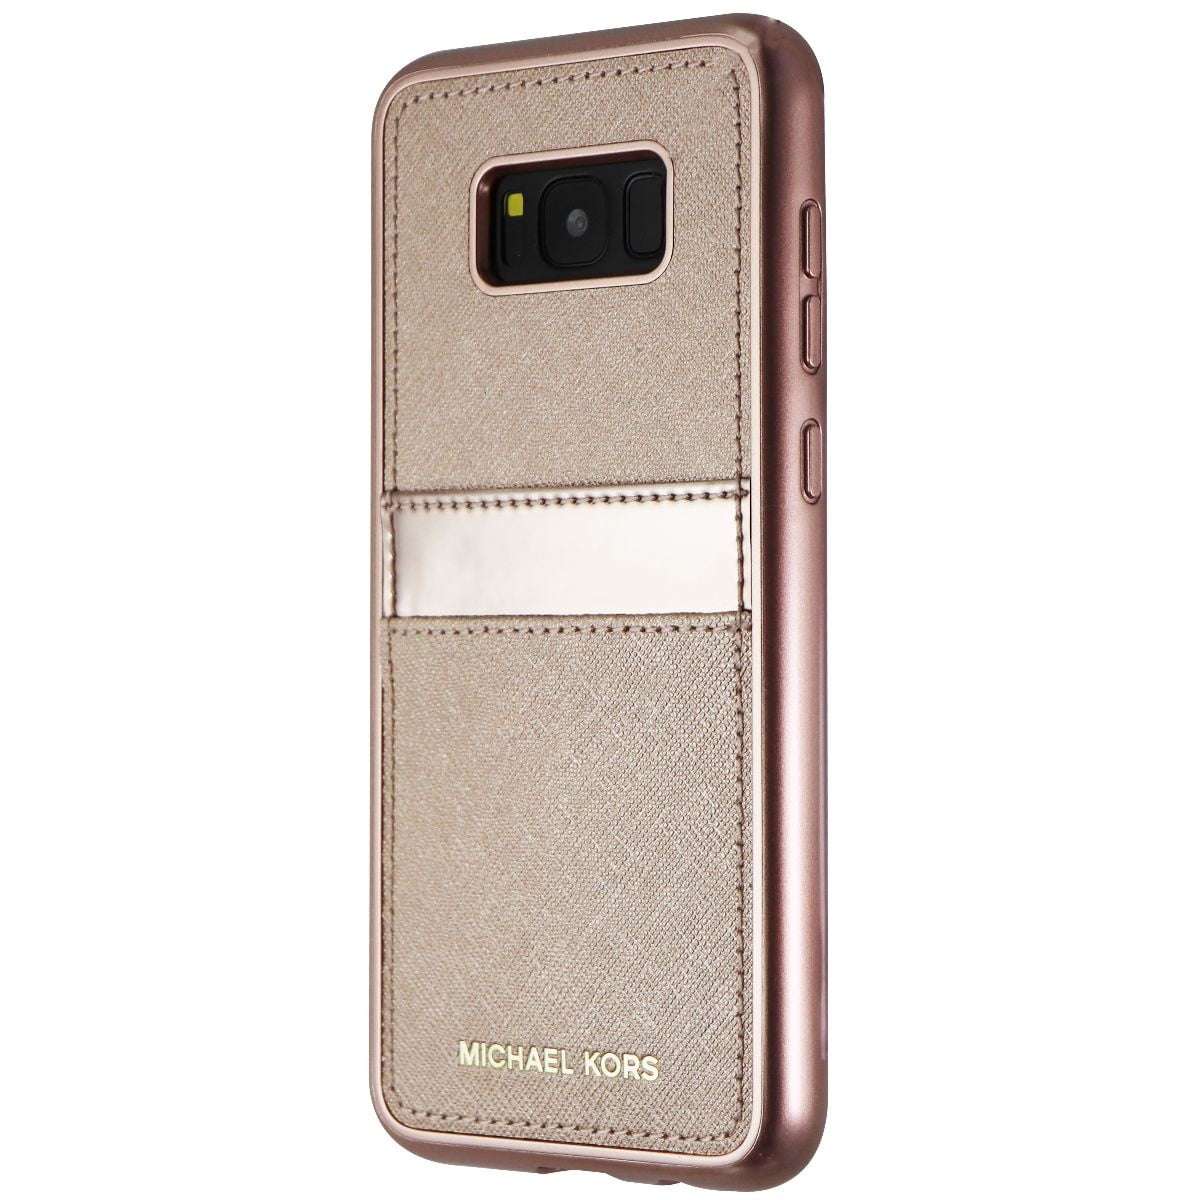 michael kors android phone case